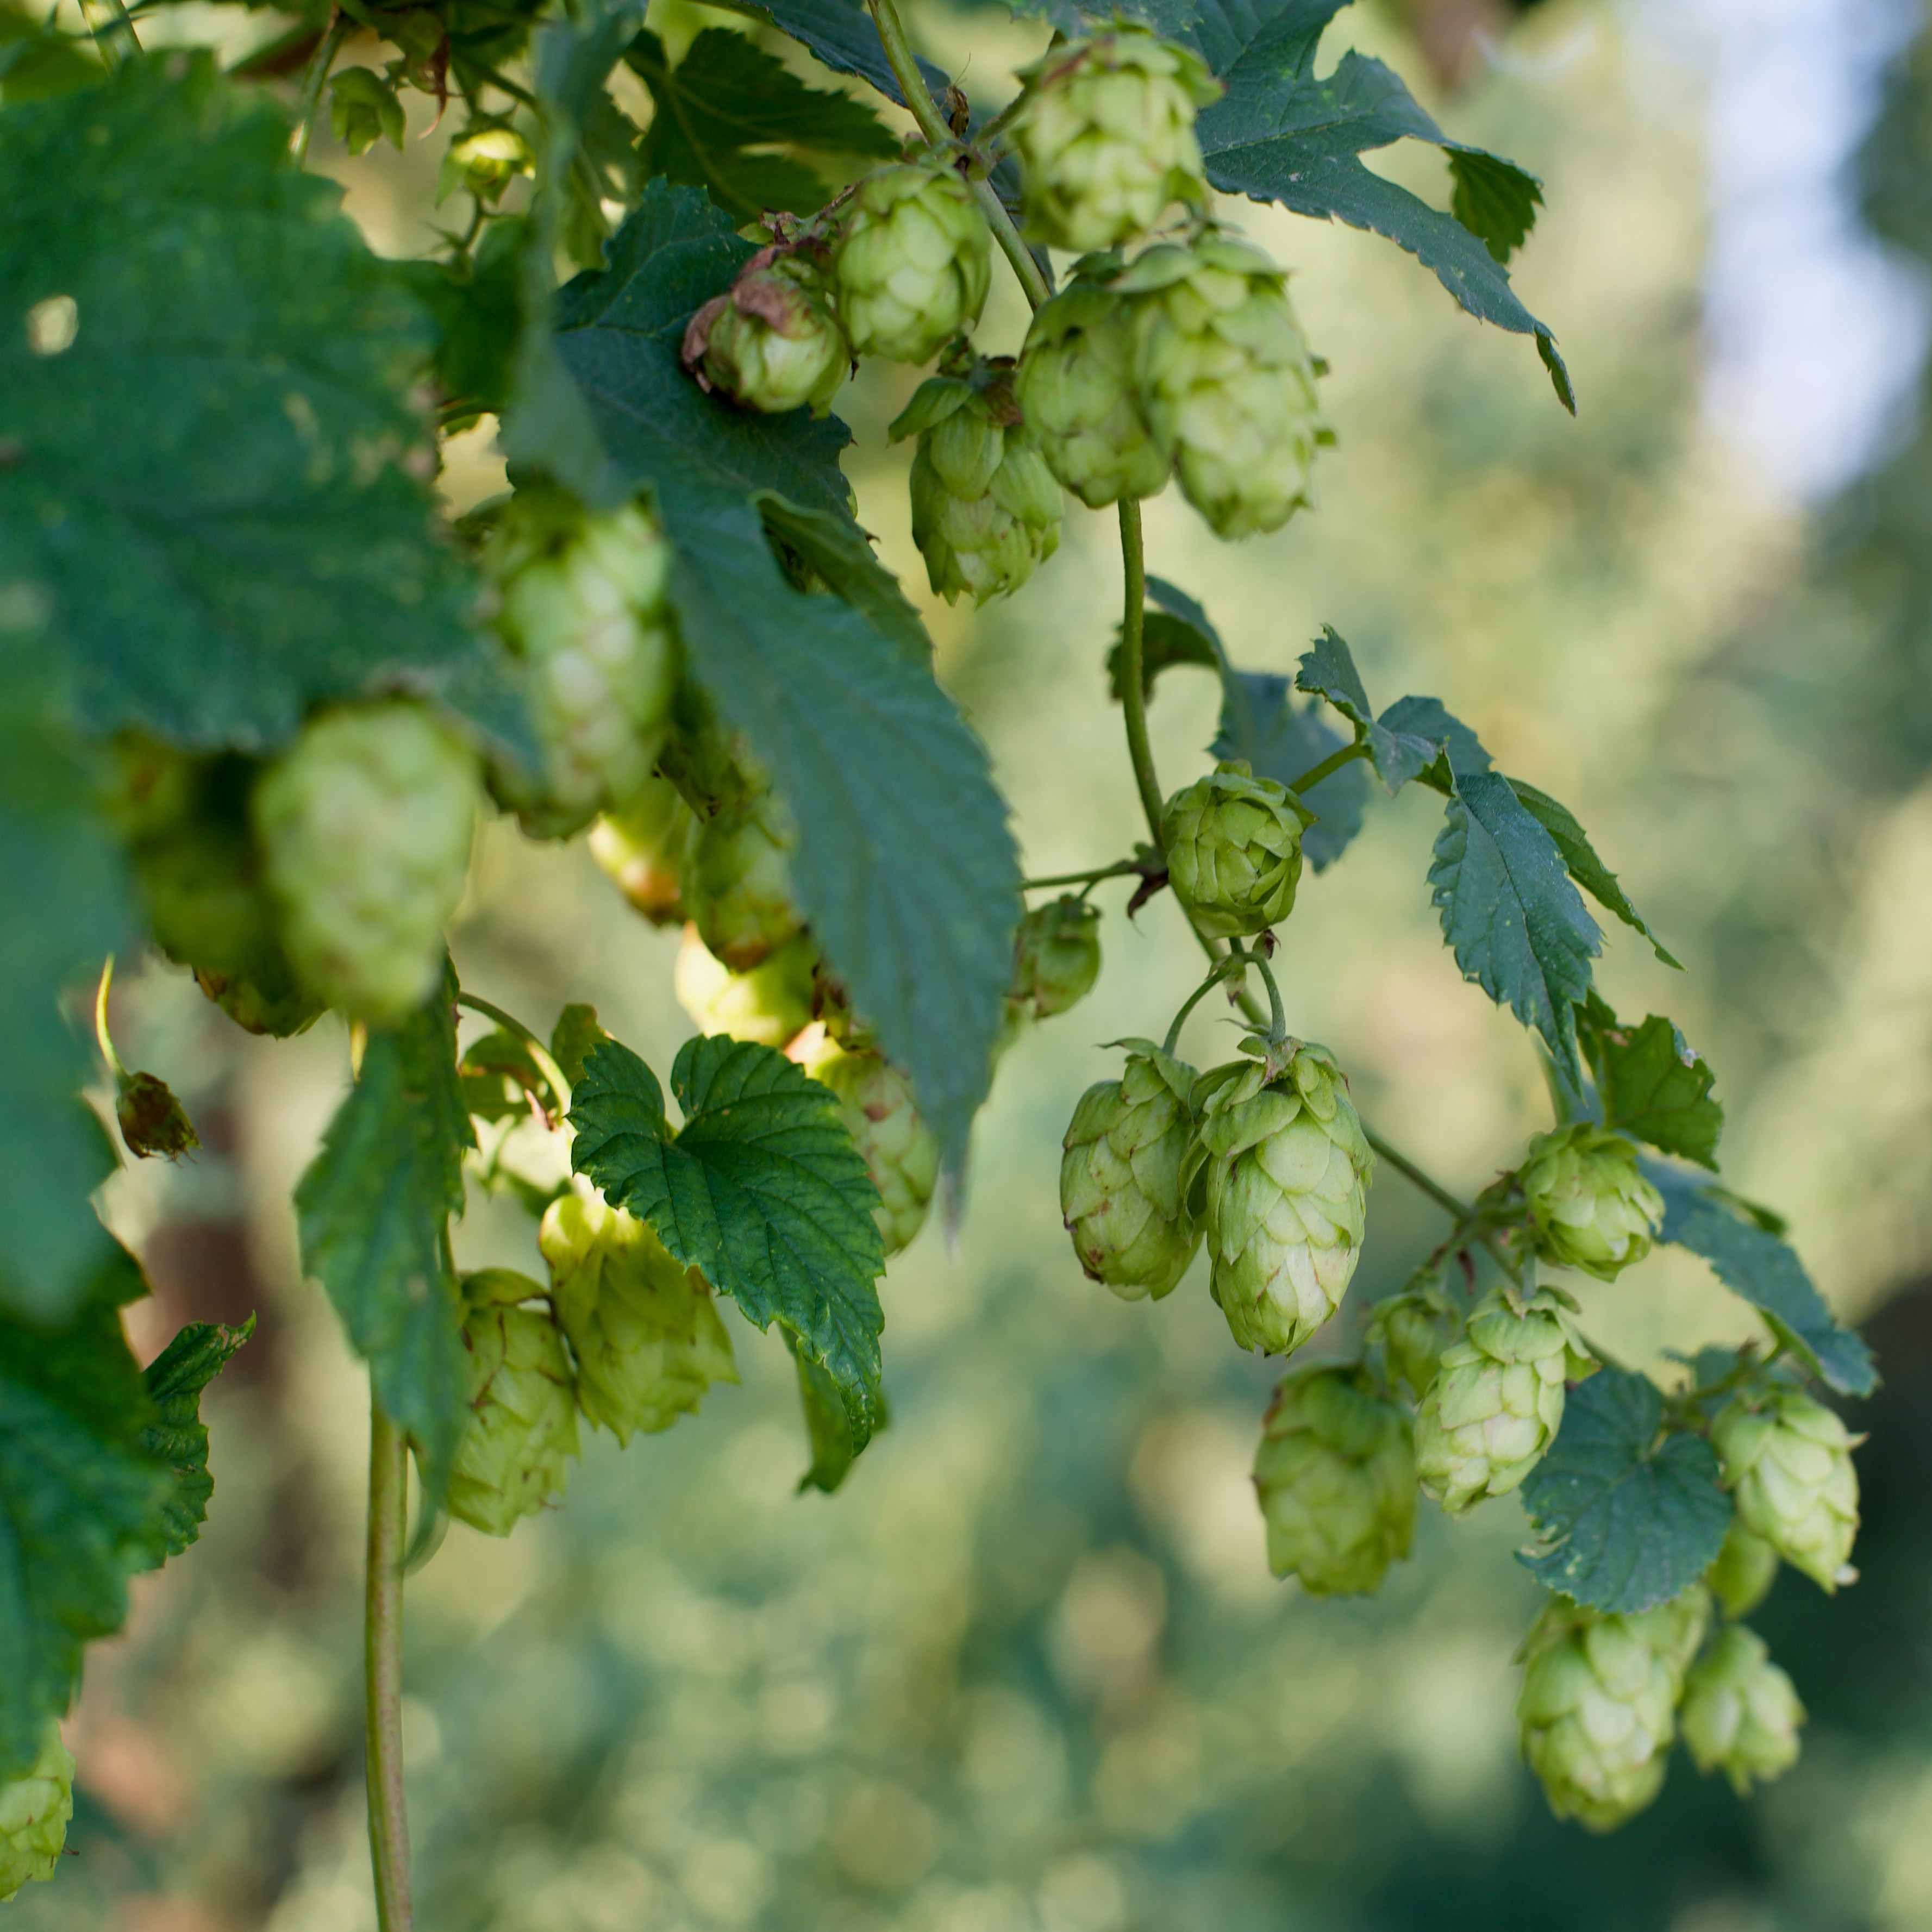 The British Hop Growing Movement: A Revival in the Making